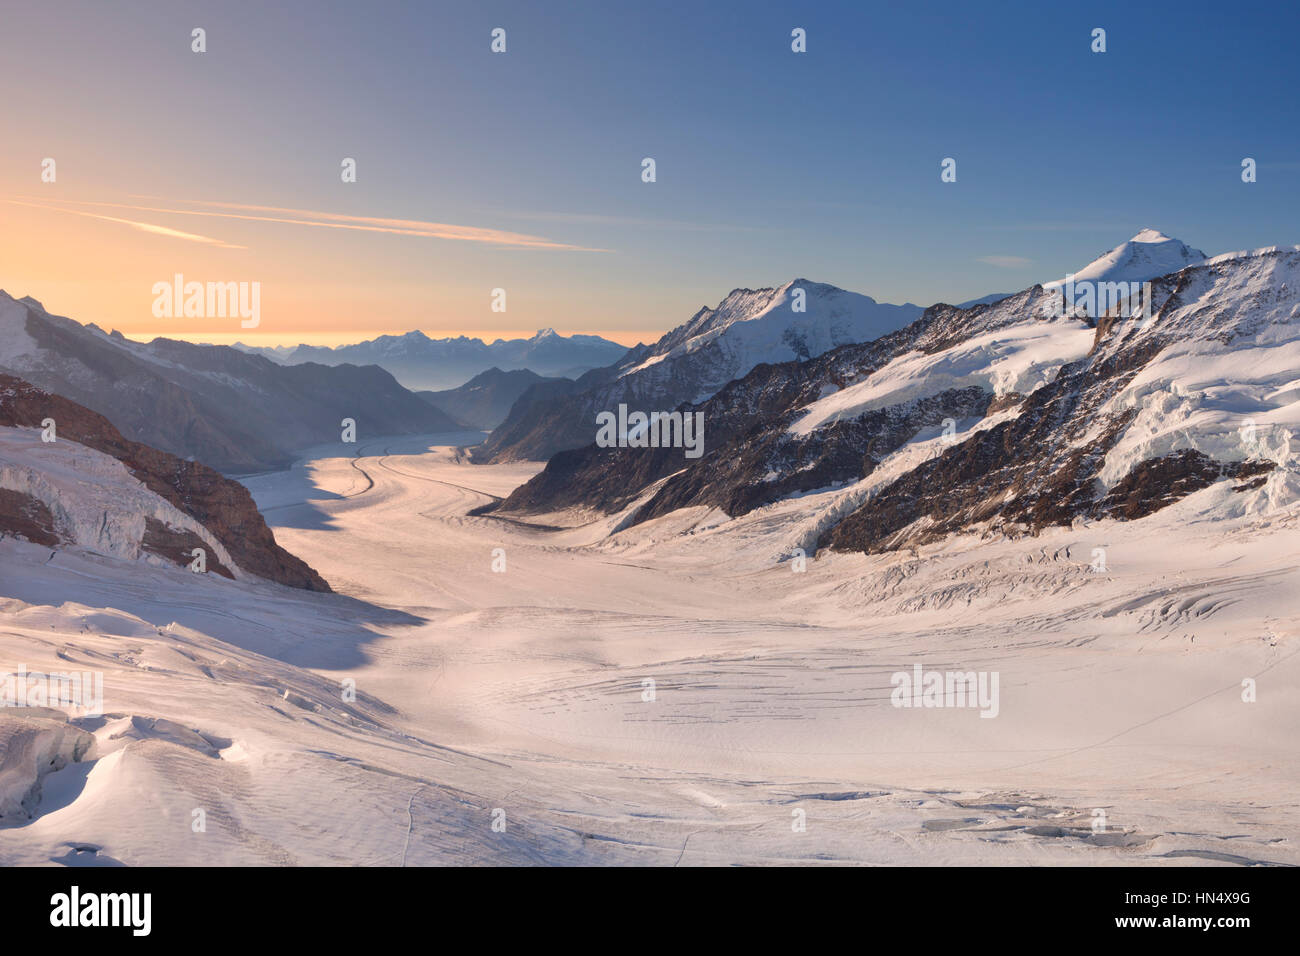 Sunrise over the Aletsch Glacier from Jungfraujoch in Switzerland on a clear morning. Stock Photo